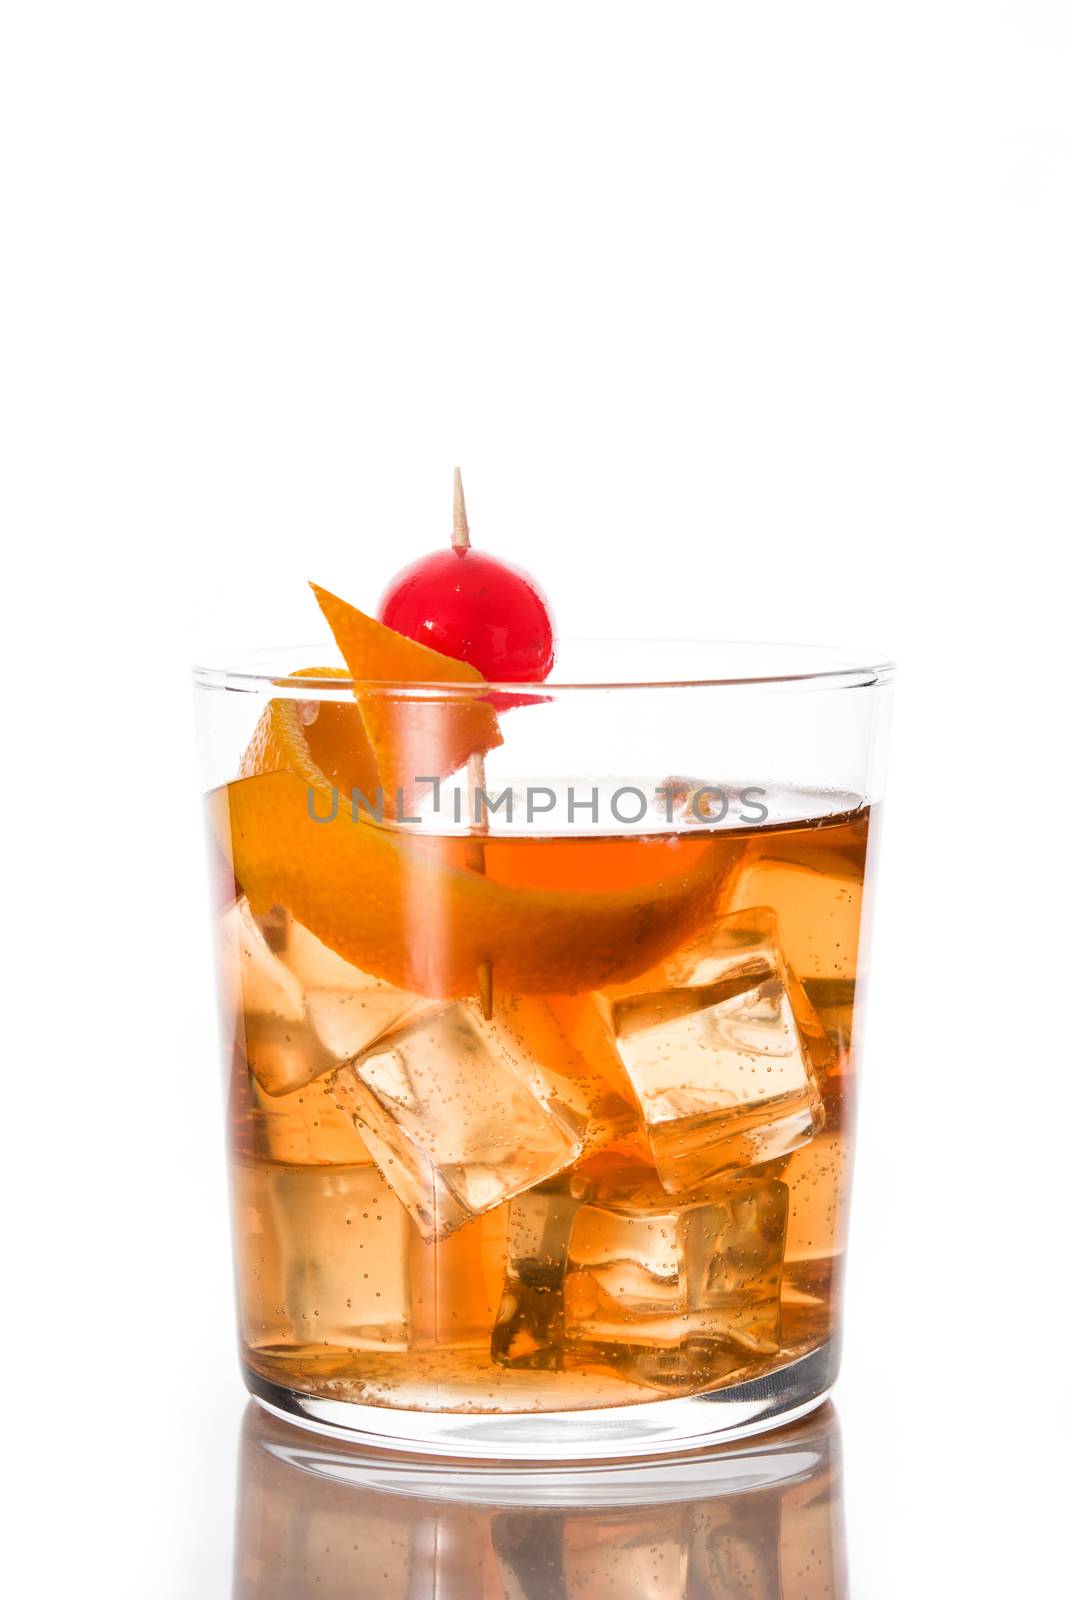 Old fashioned cocktail with orange and cherry by chandlervid85